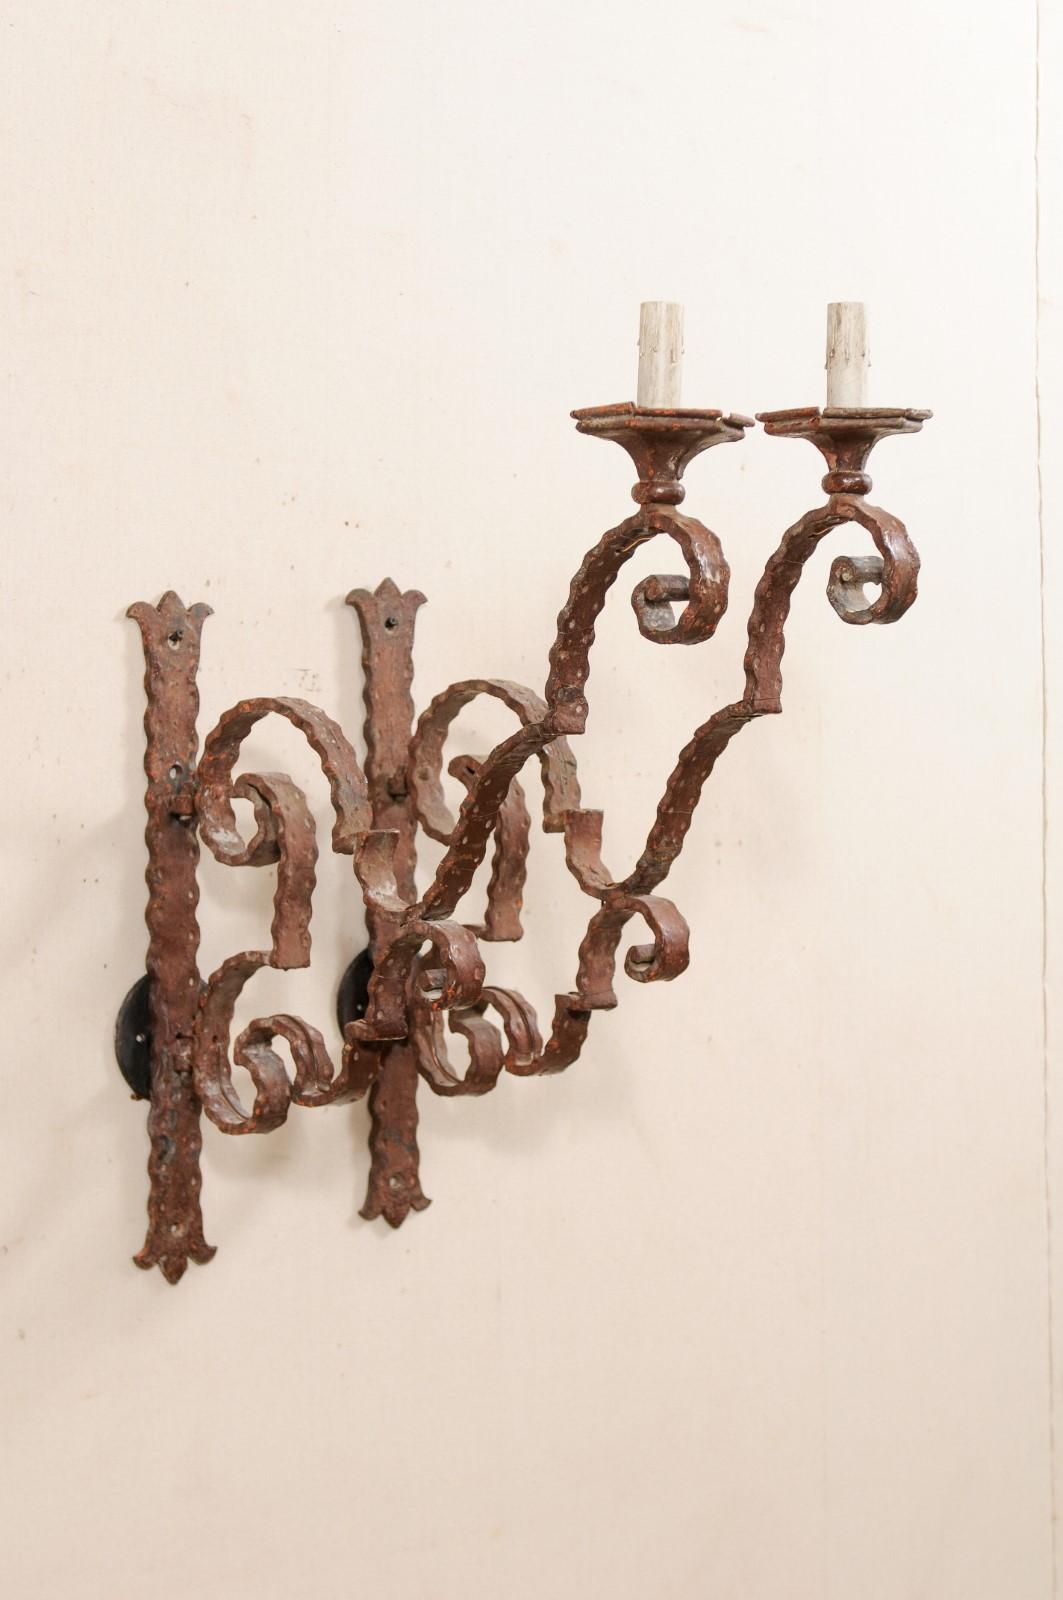 A pair of Italian single light iron sconces, long arm extensions, from the 19th century. This pair of antique sconces from Italy each feature a large-sized single arm, comprised of scrolling armature, with nice, outward projection, with a single